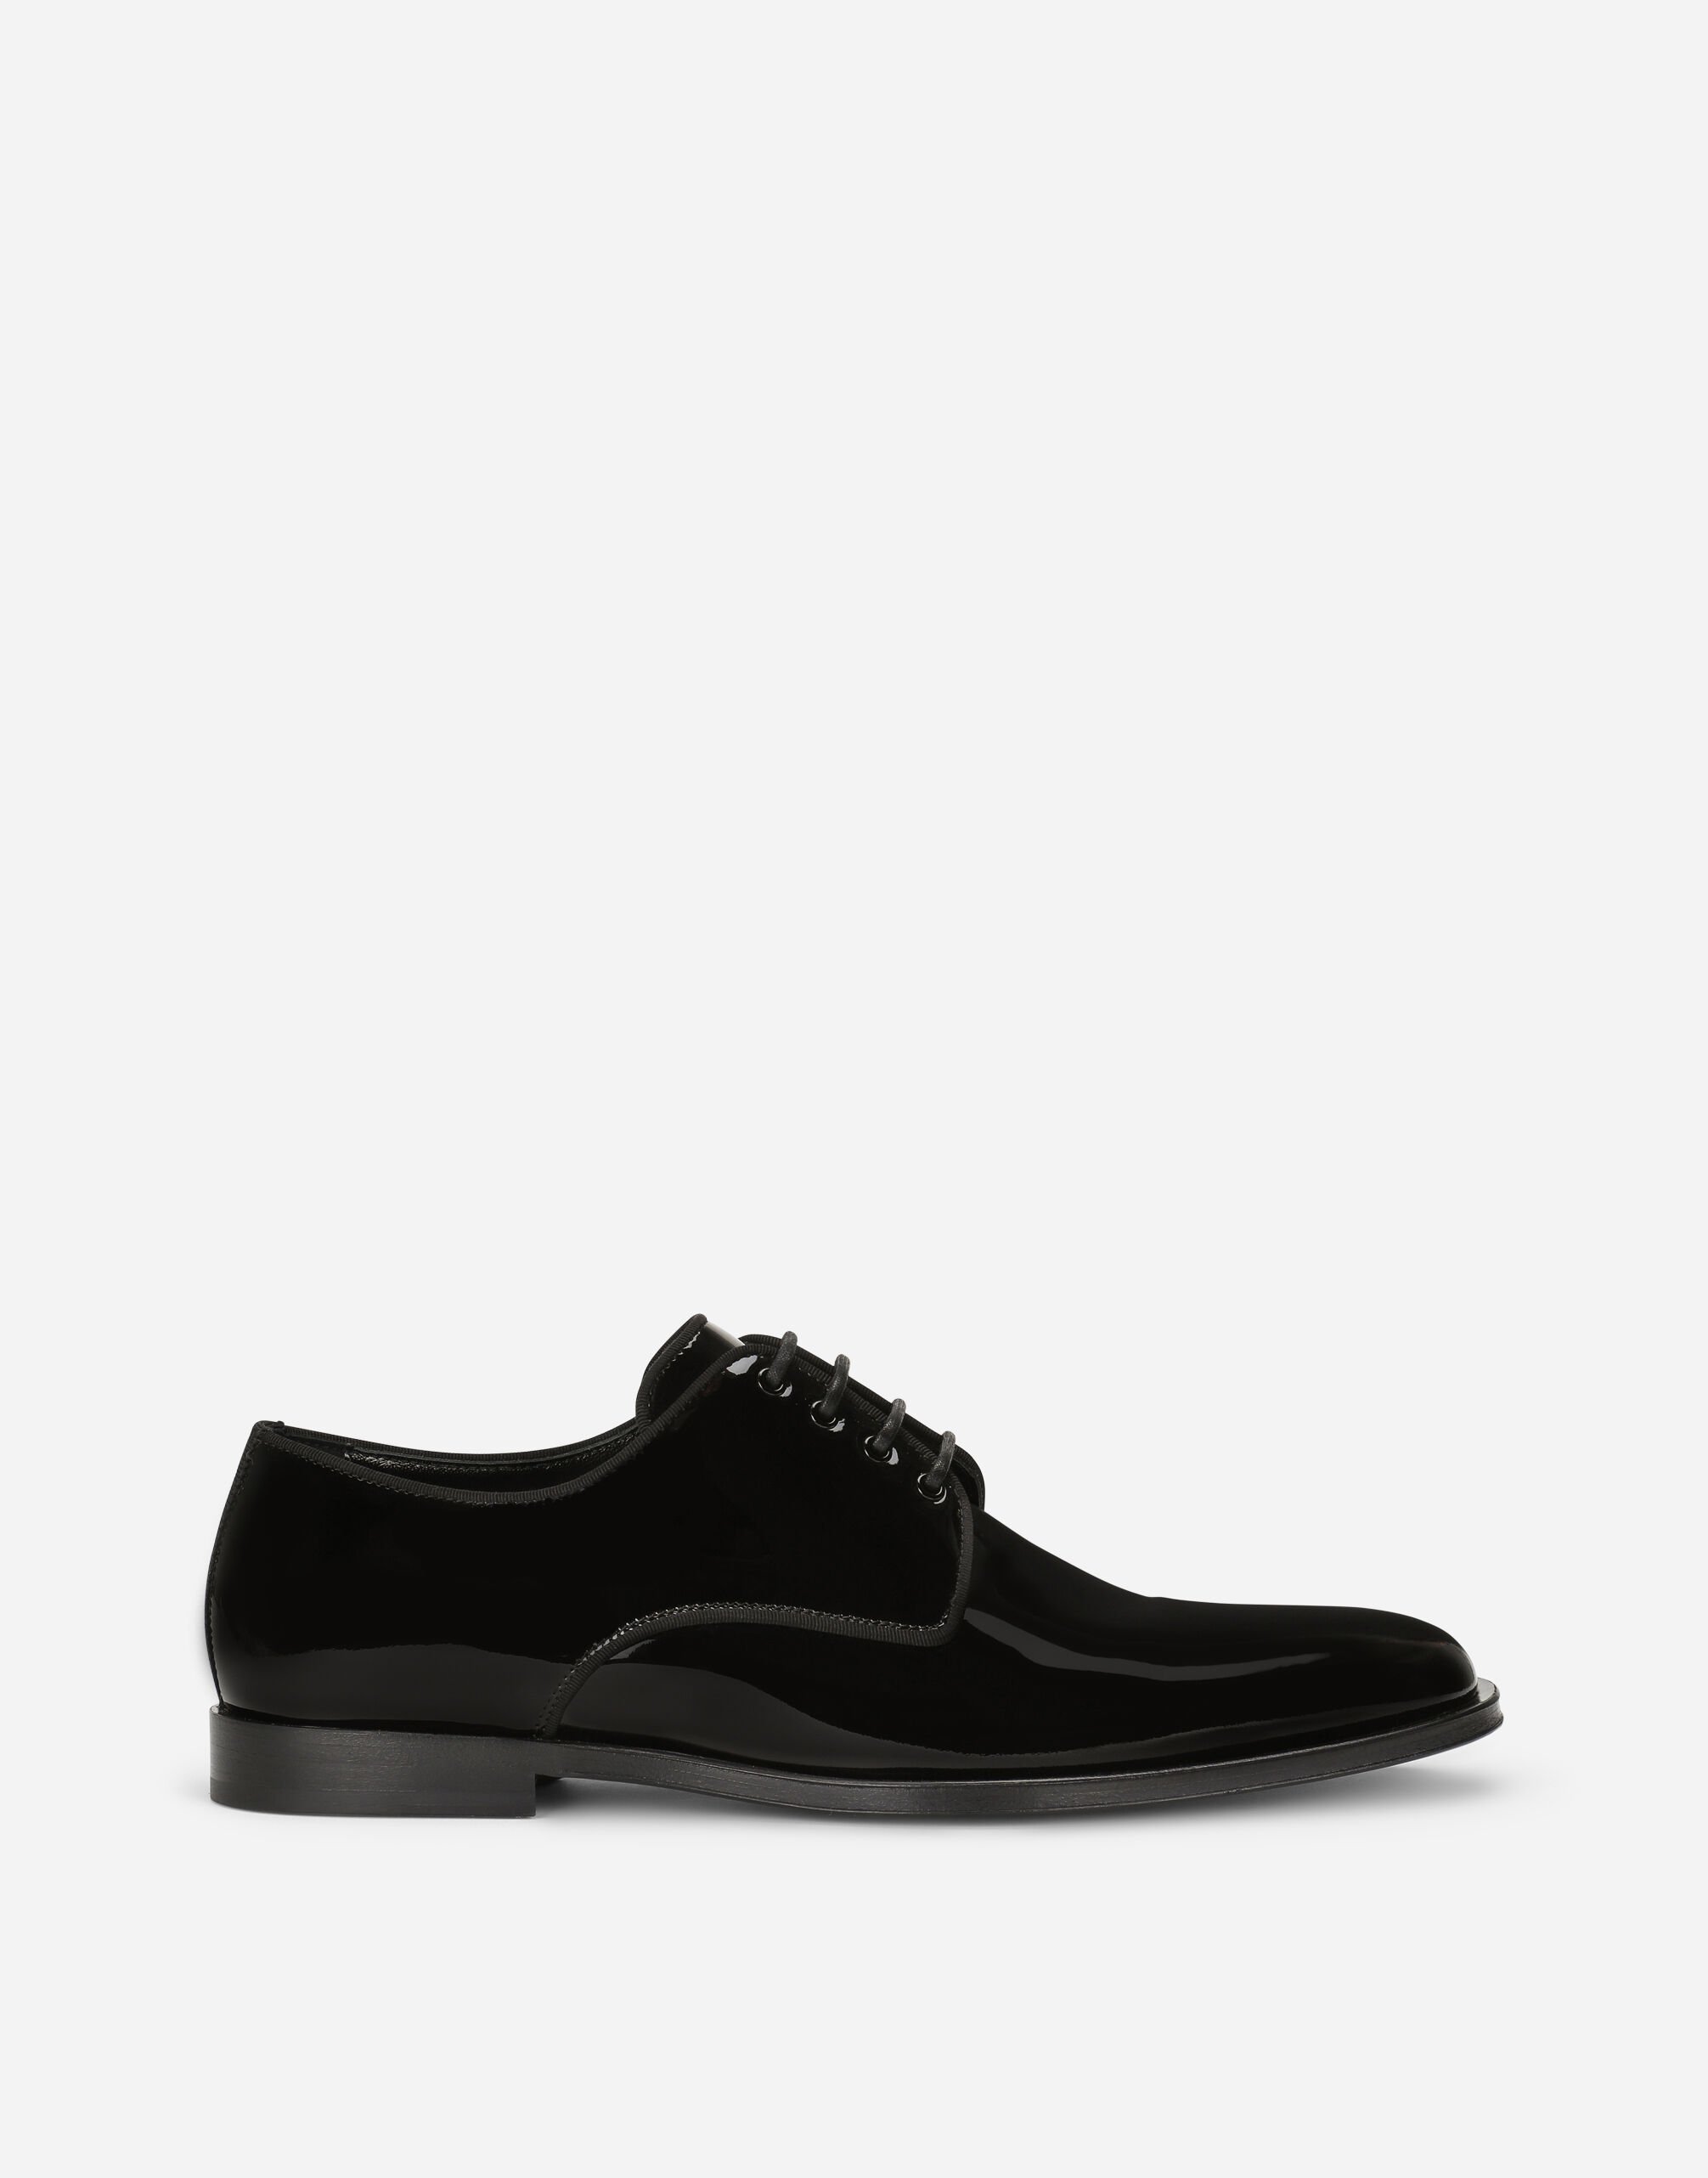 Dolce & Gabbana Glossy patent leather derby shoes Black A10840A1203